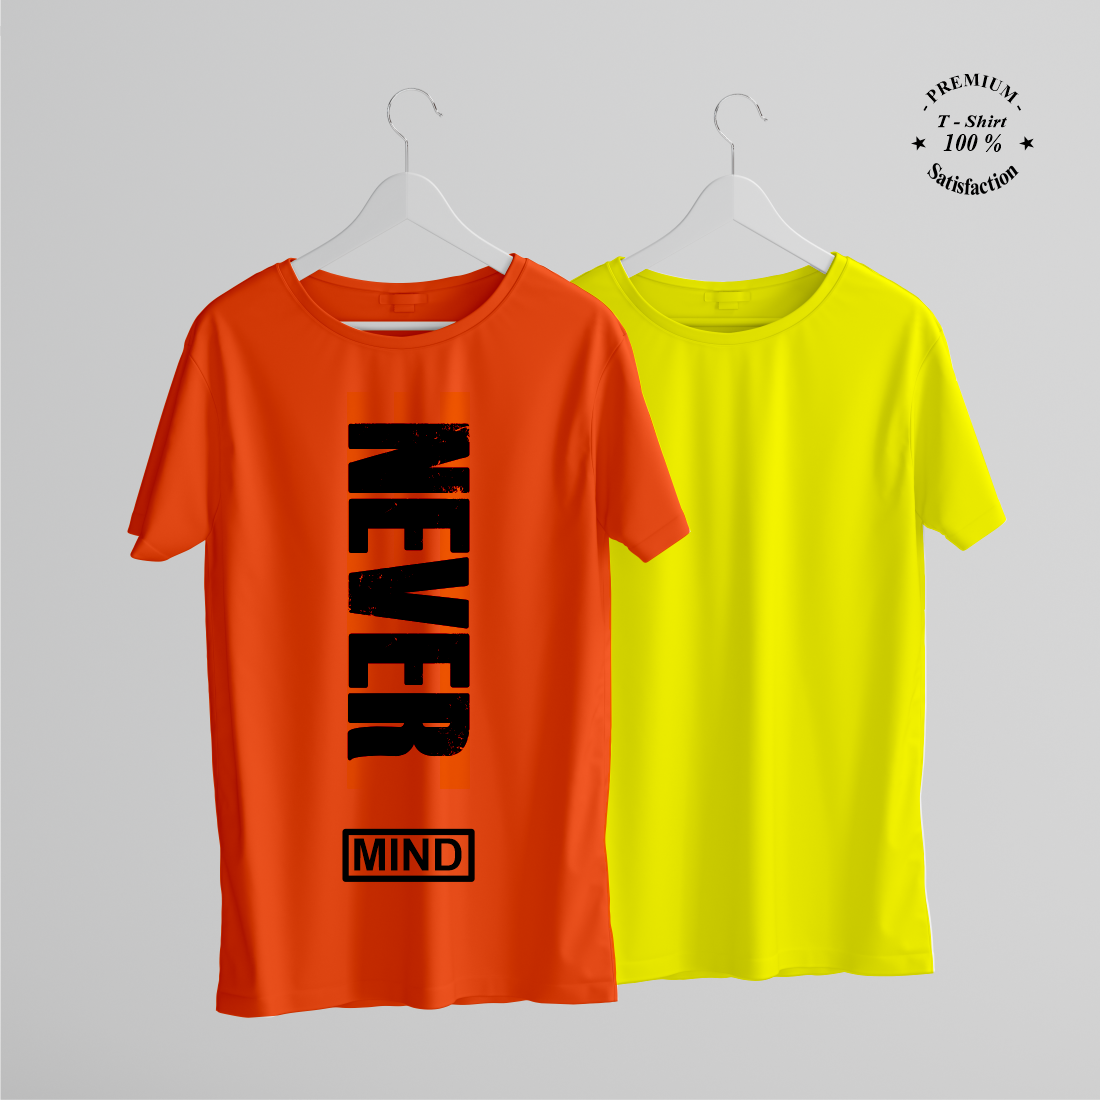 NEVER MIND PRINTED T-SHIRTS